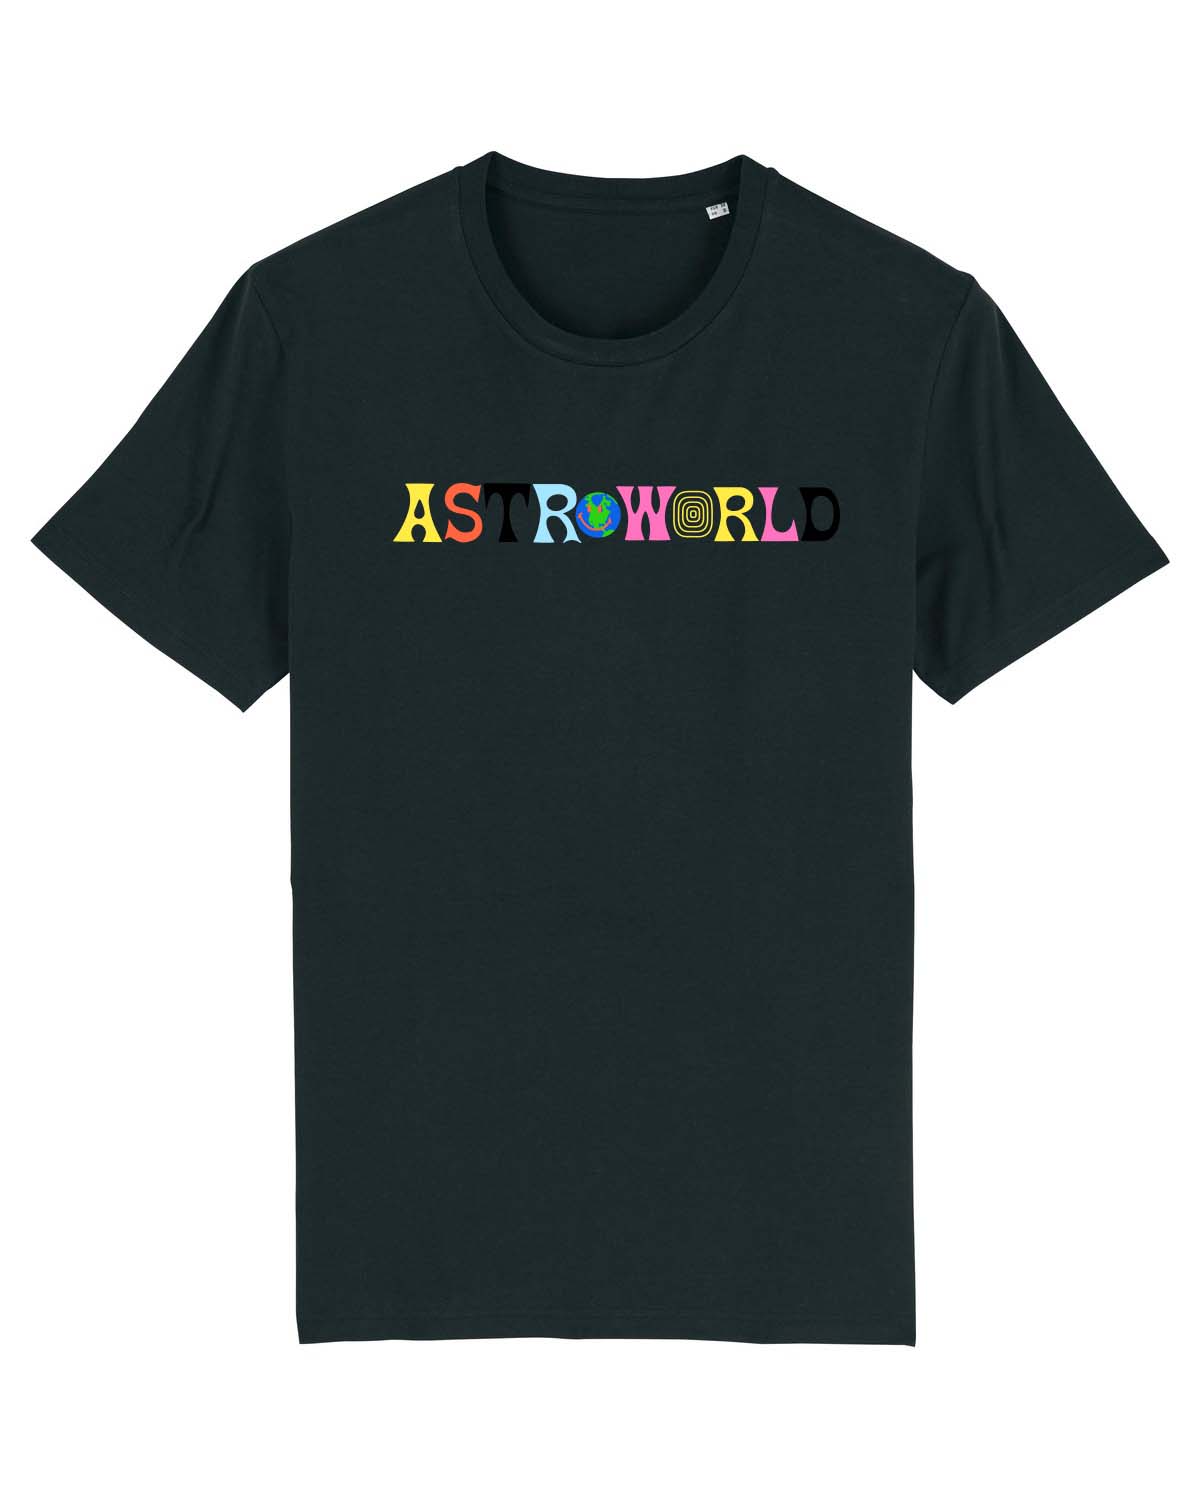 T shirt Astroworld Down to Earth Black